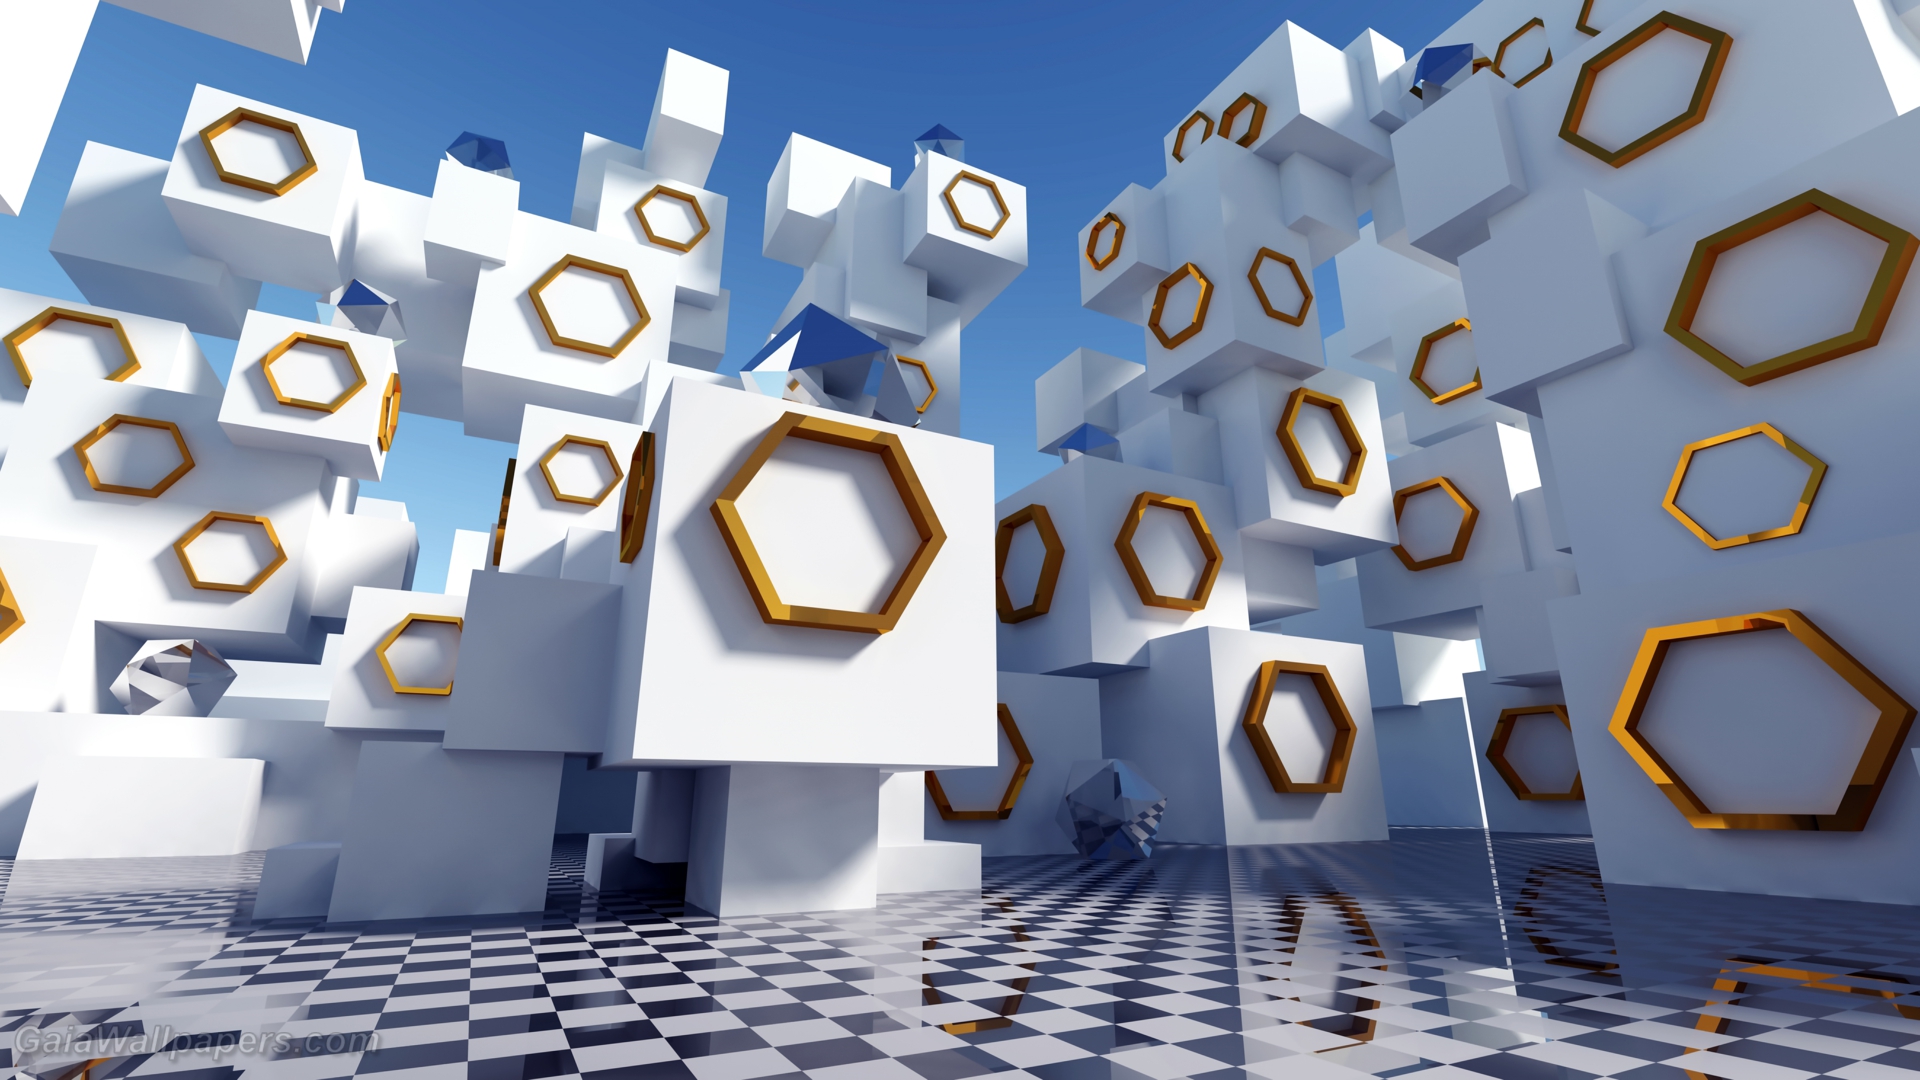 Mysterious cubes stacked up with symbols - Free desktop wallpapers